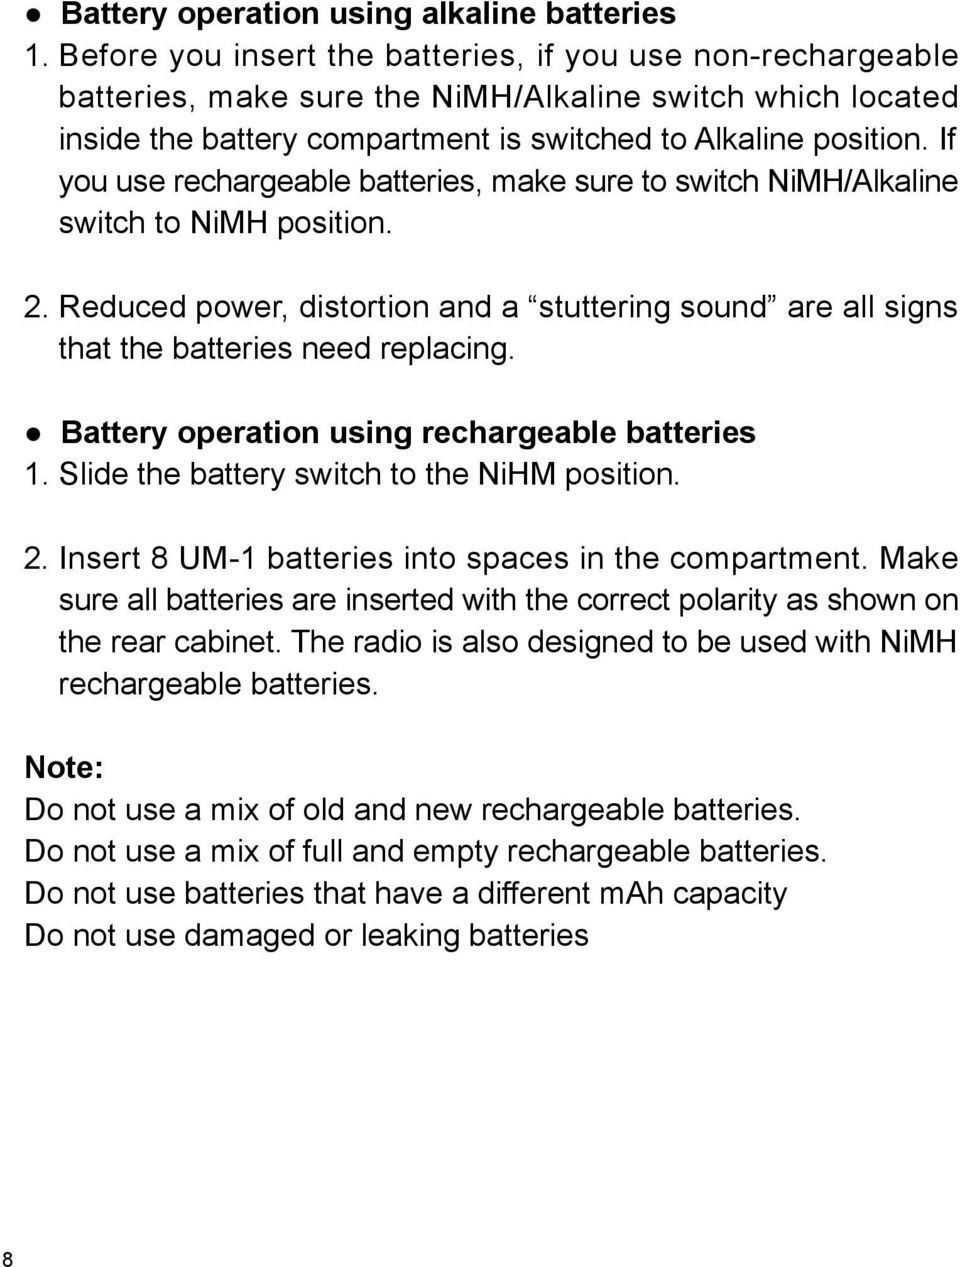 If you use rechargeable batteries, make sure to switch NiMH/Alkaline switch to NiMH position. 2. Reduced power, distortion and a stuttering sound are all signs that the batteries need replacing.